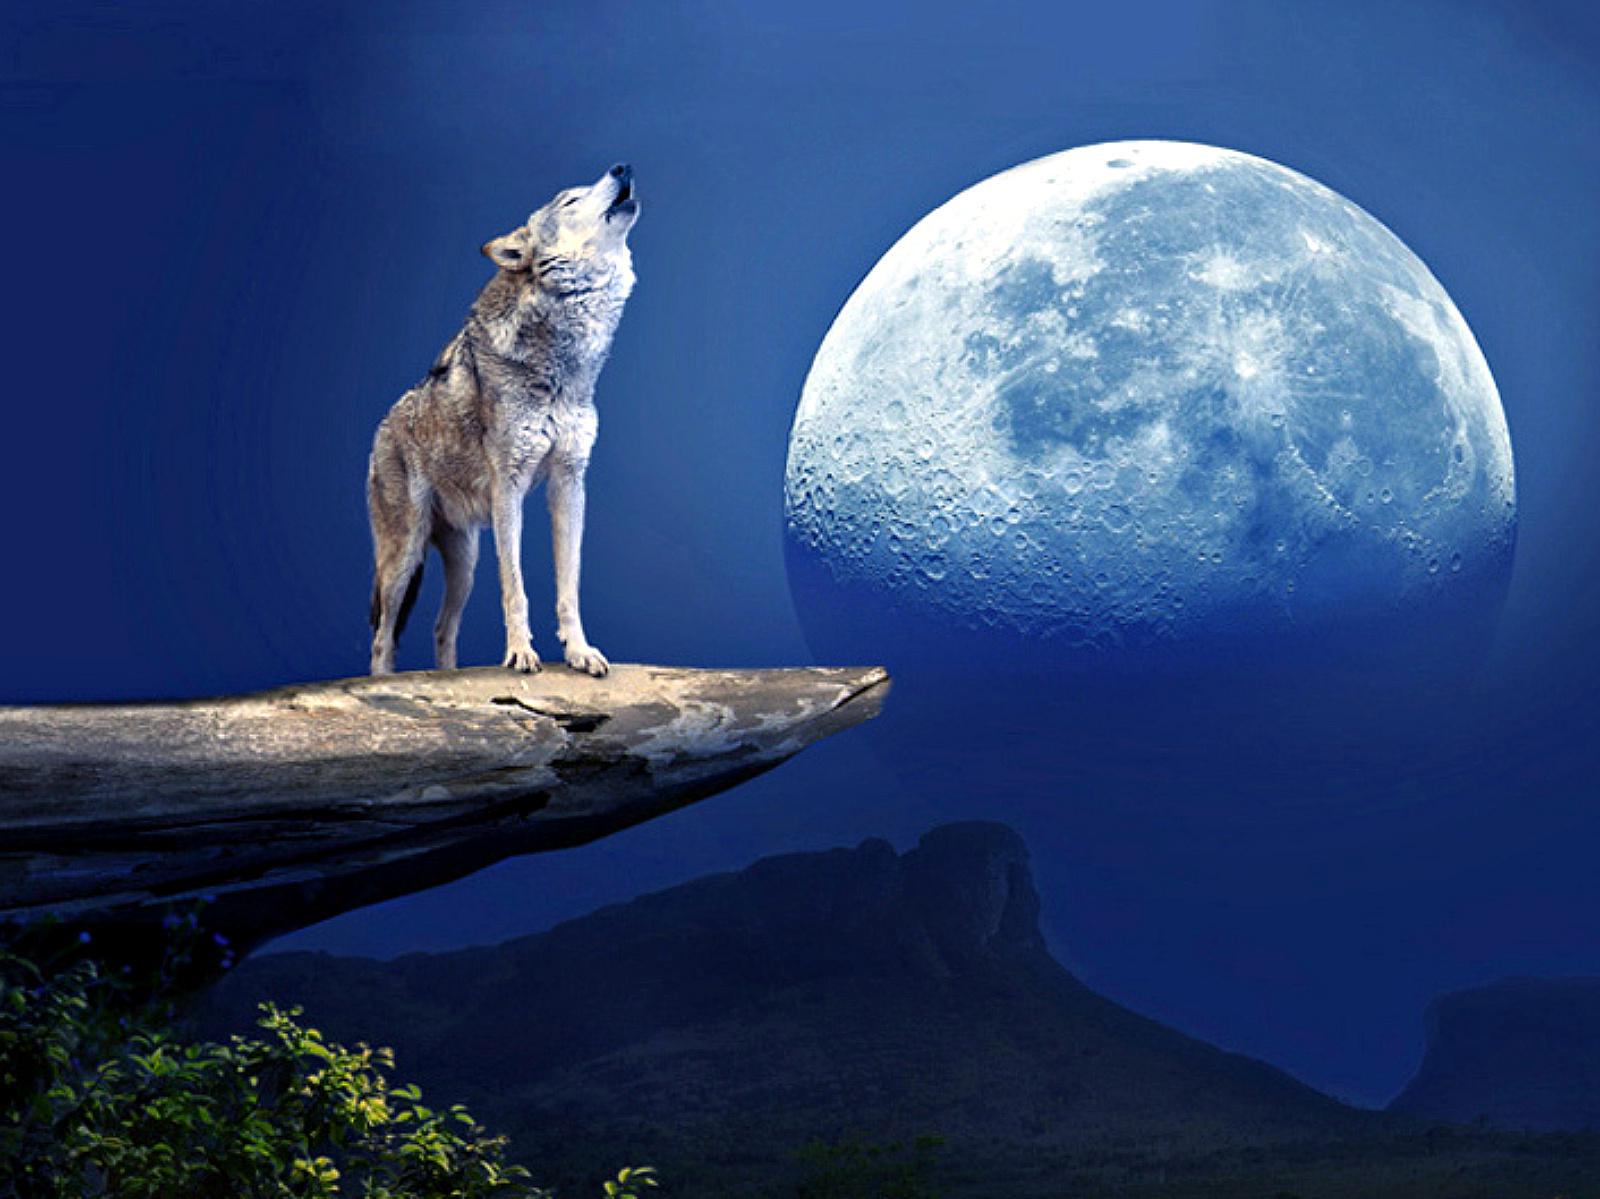 WOLF HOWLING AT THE MOON WALLPAPER   125631   HD Wallpapers